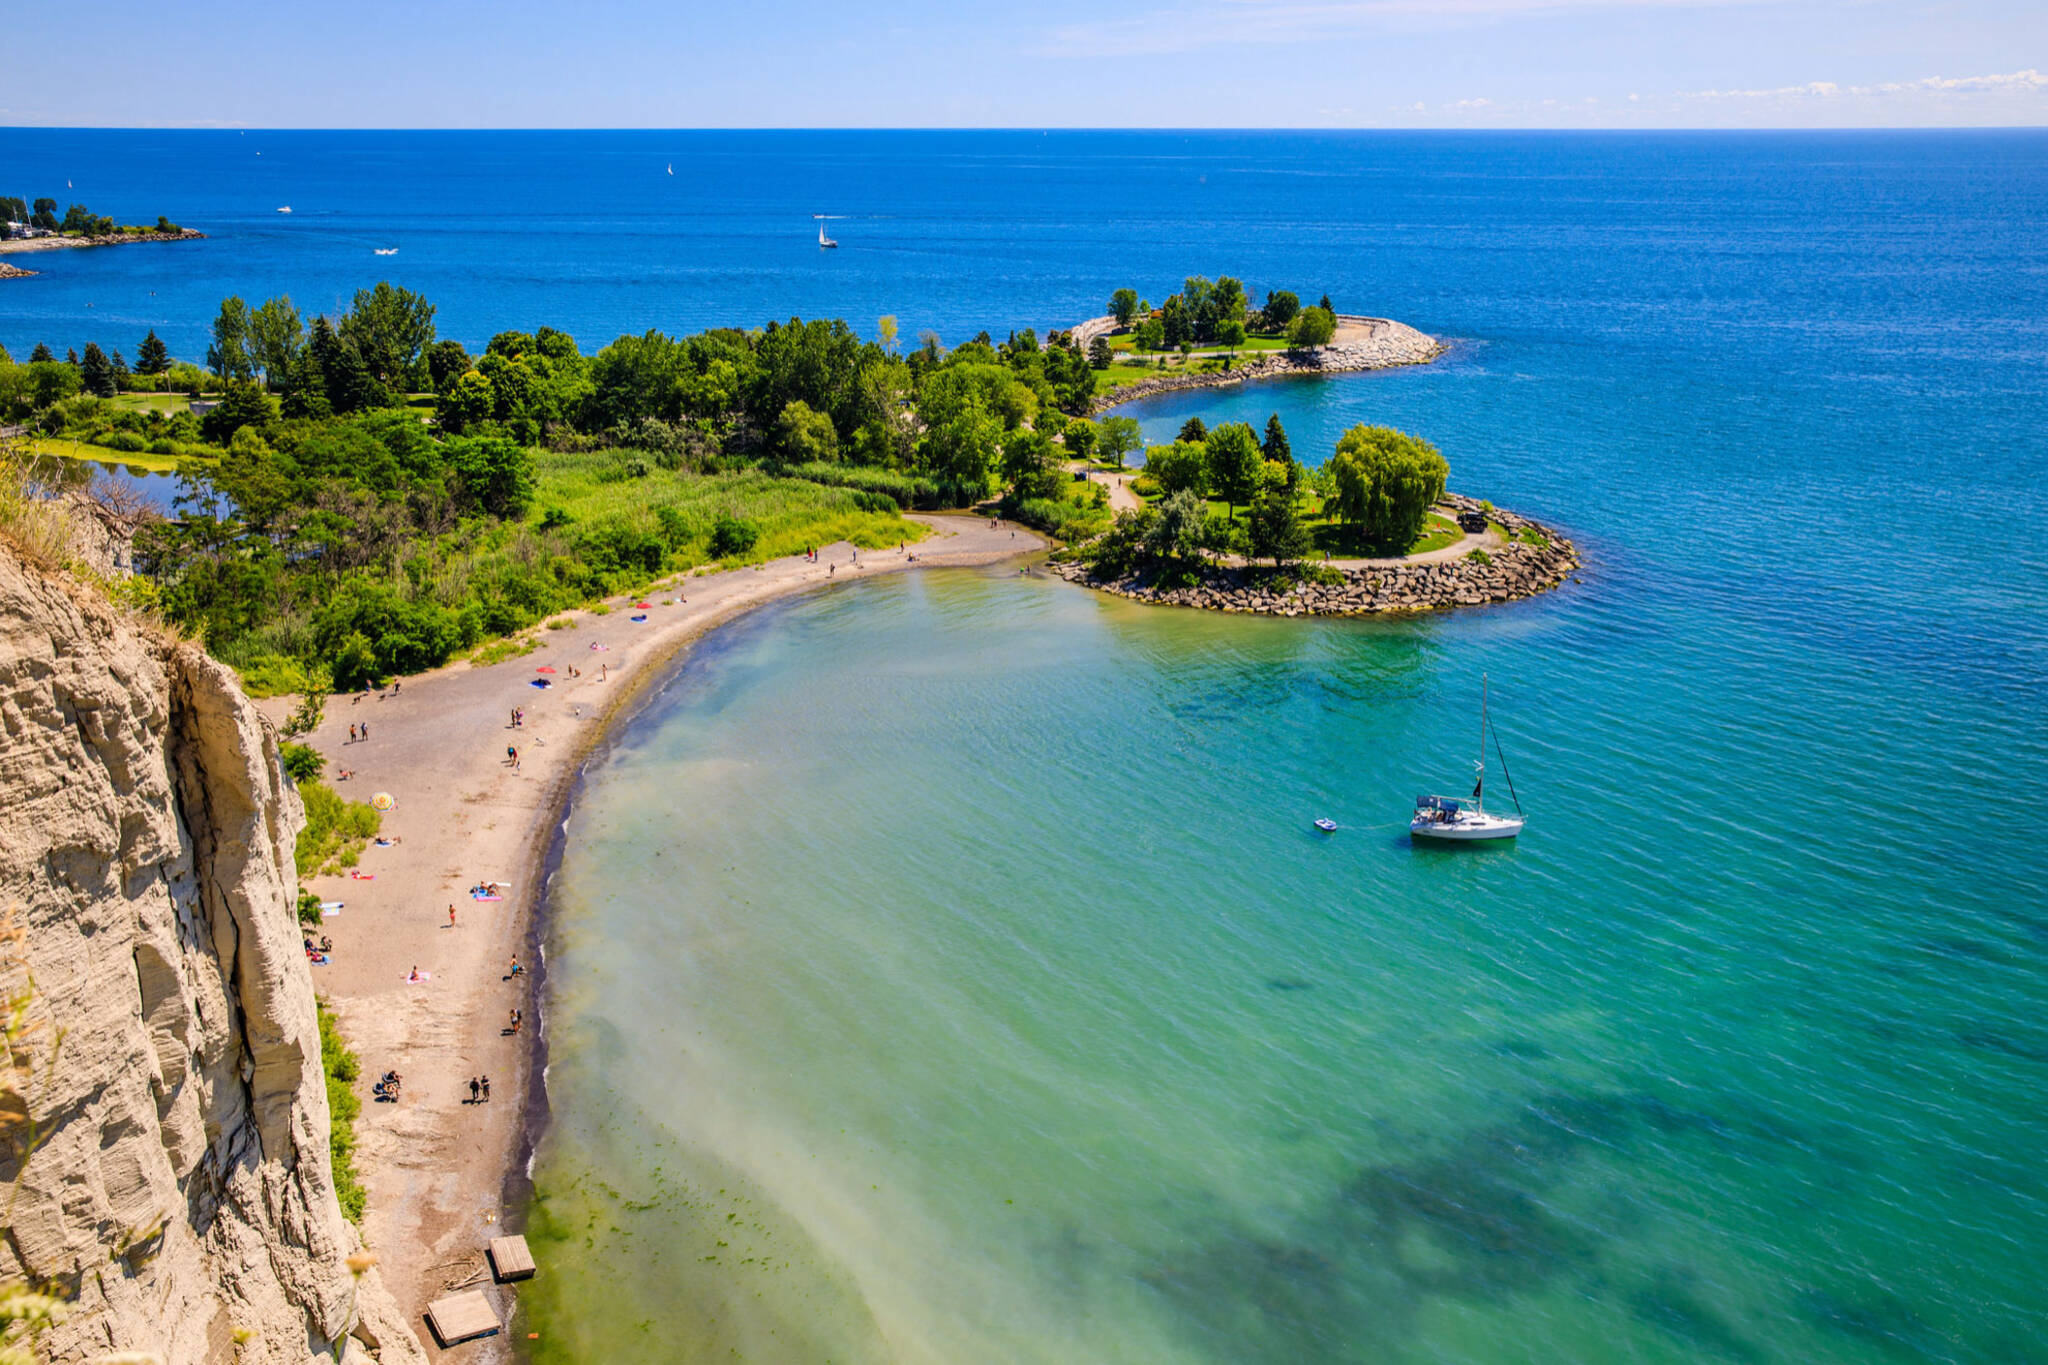 People in Toronto are discovering Scarborough Bluffs for the first time